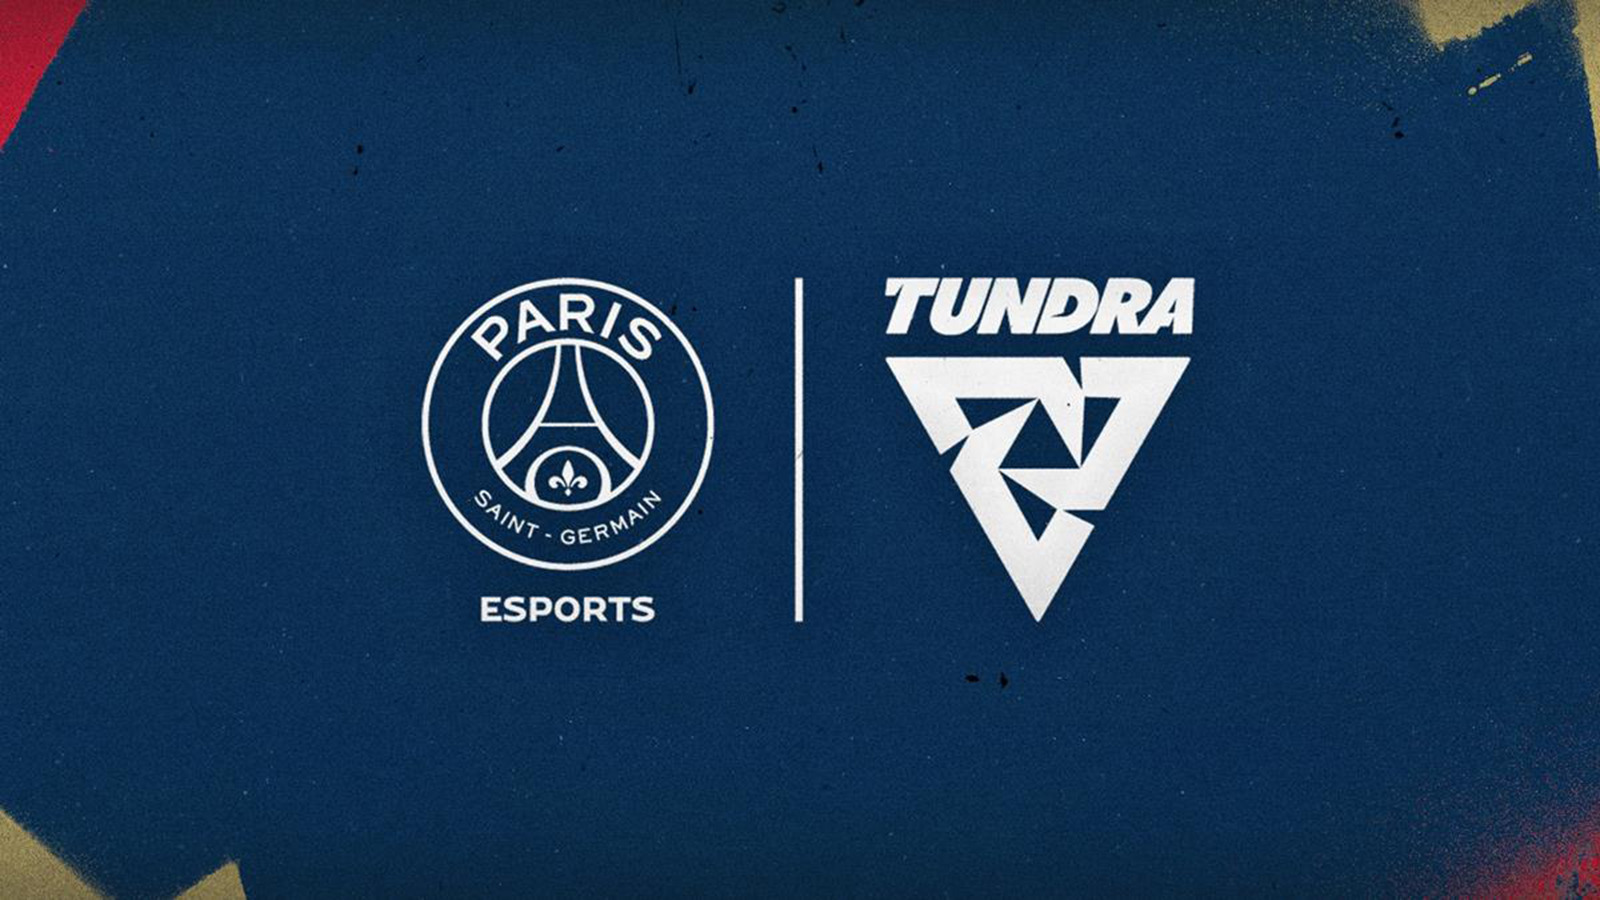 PSG Esports Teams Up with Tundra for Rocket League